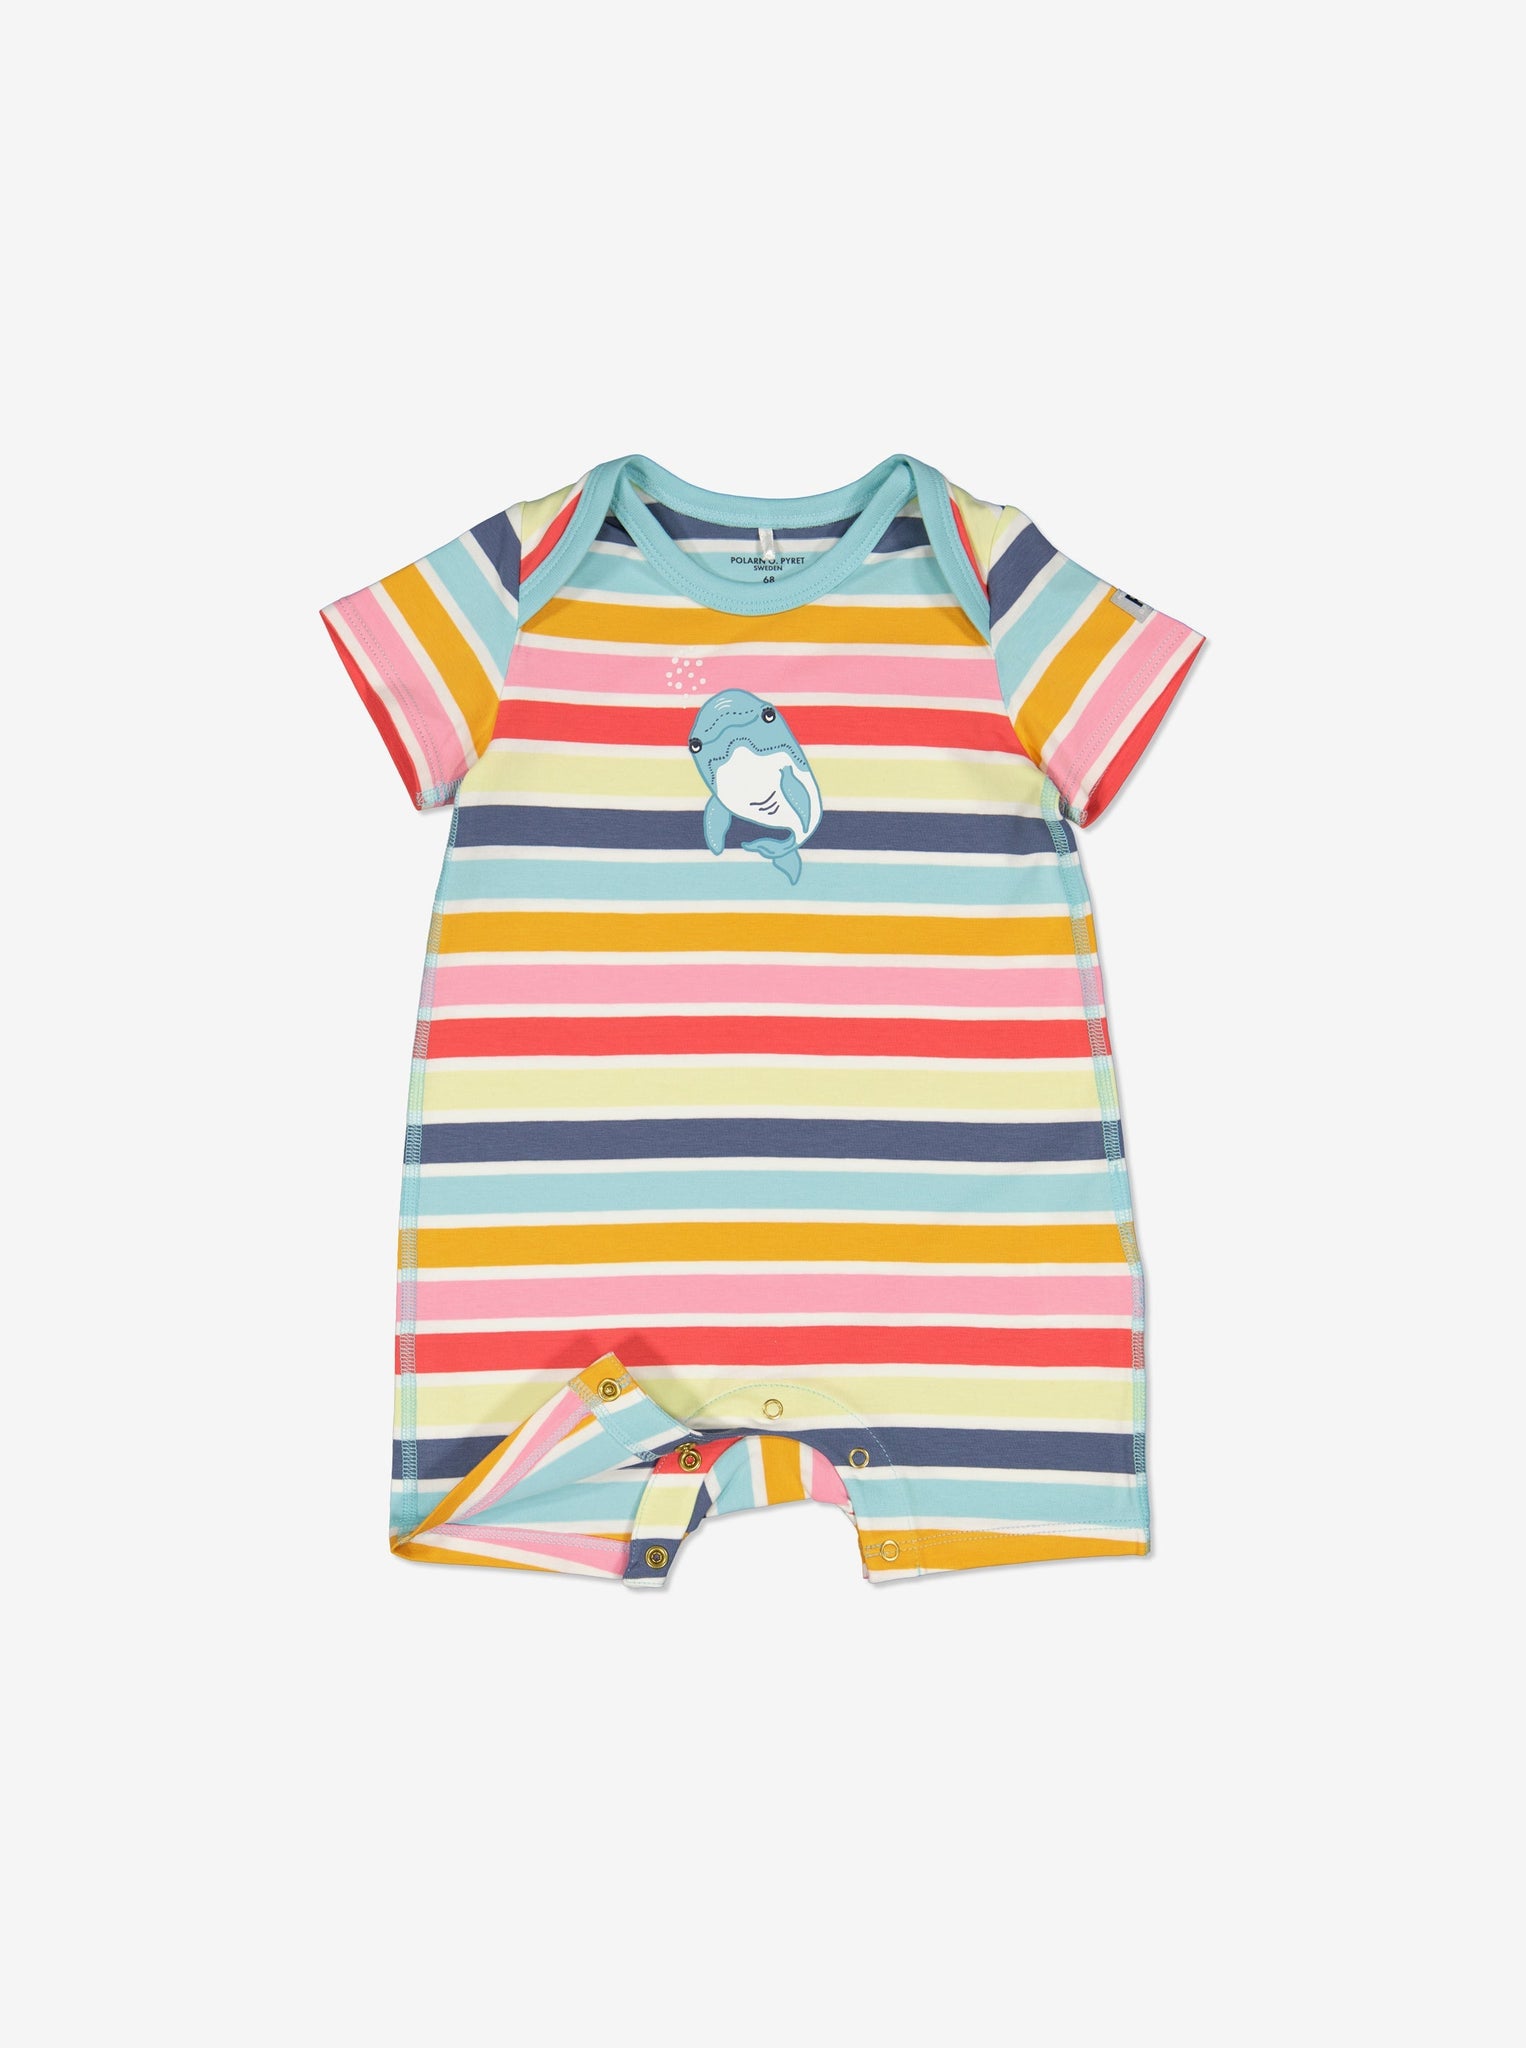 Striped Newborn Baby Romper from Polarn O. Pyret Kidswear. Made from ethically sourced materials.